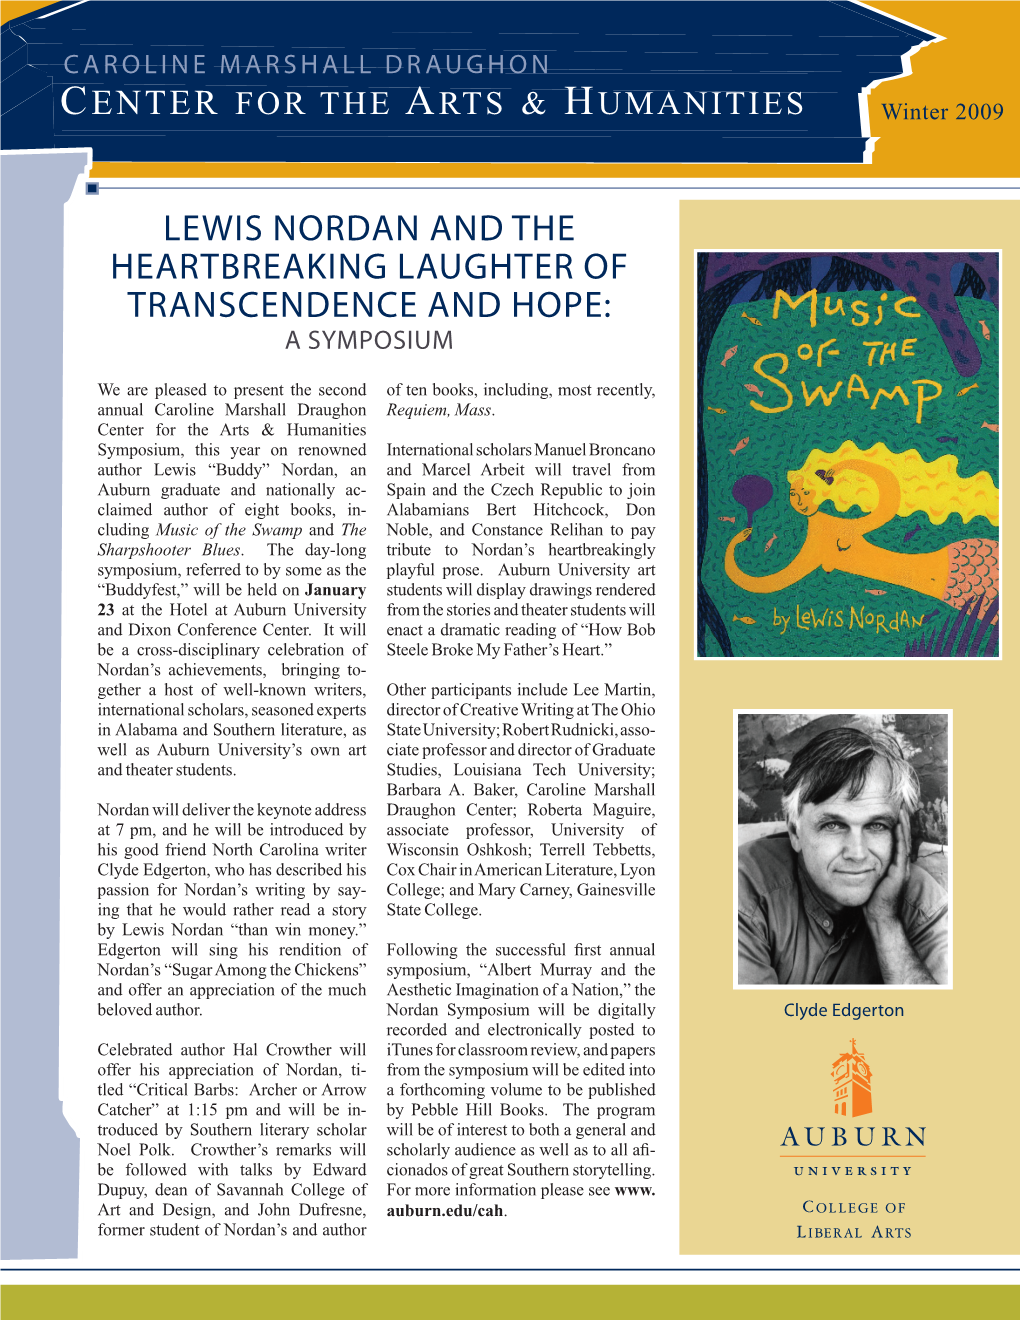 Lewis Nordan and the Heartbreaking Laughter of Transcendence and Hope: a Symposium